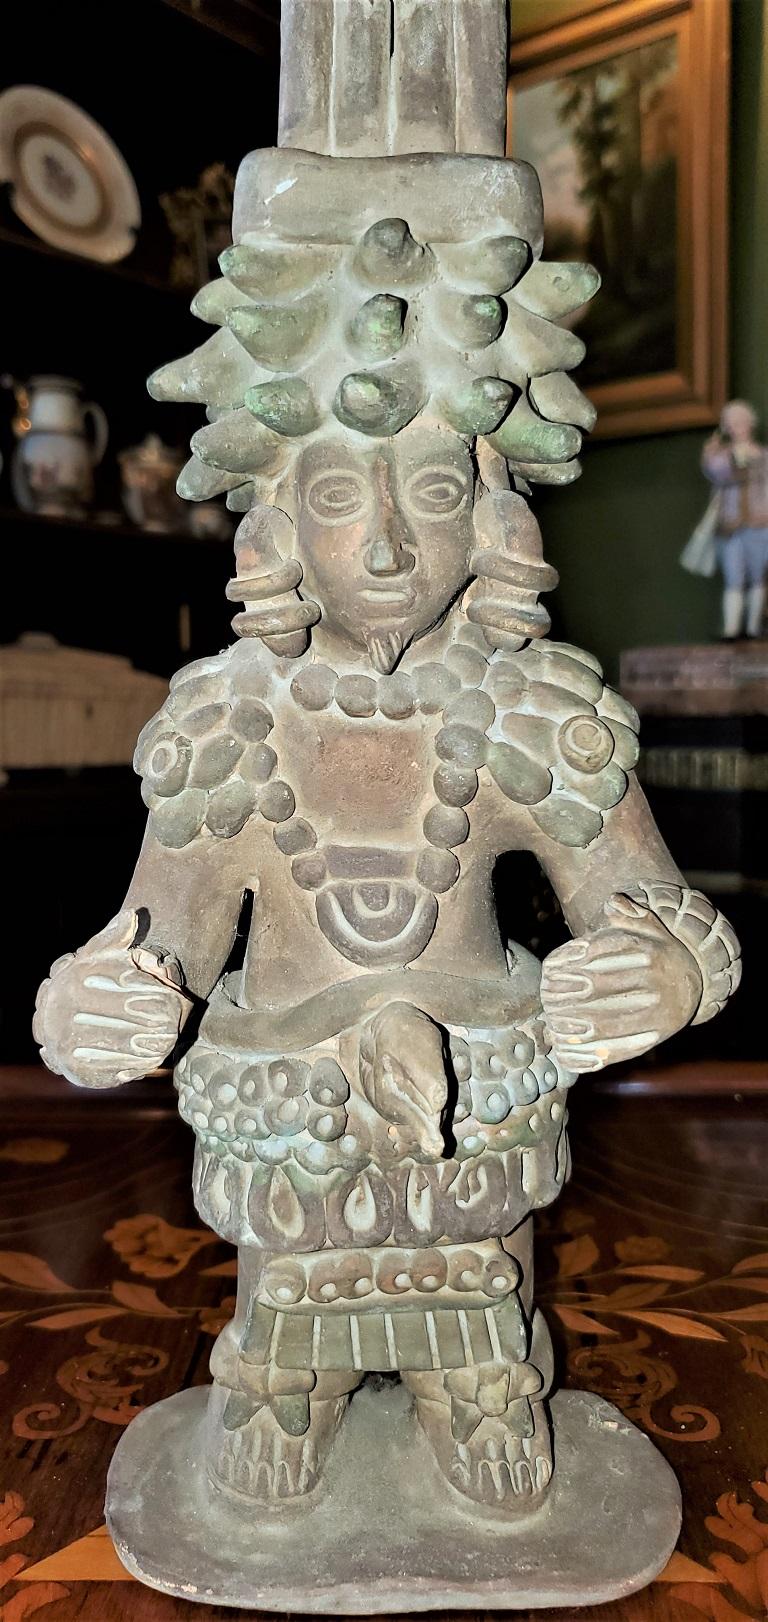 Presenting a lovely piece of reproduction Native American antiquity, namely, a vintage Pre-Columbian style Mayan Warrior.

From circa the early 20th century and probably made in Mexico.

The centerpiece is very Mayan in form and shape with a